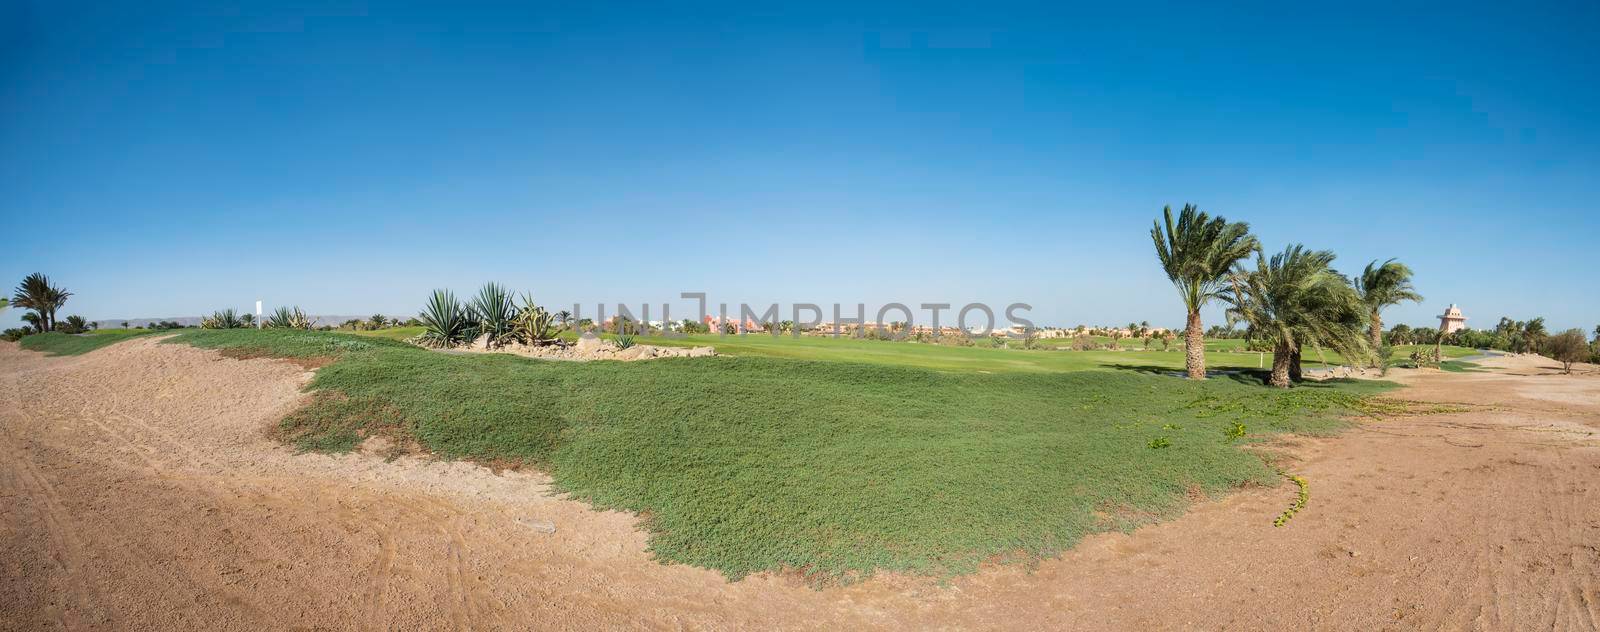 Panoramic view across golf course in landscaped tropical resort by paulvinten